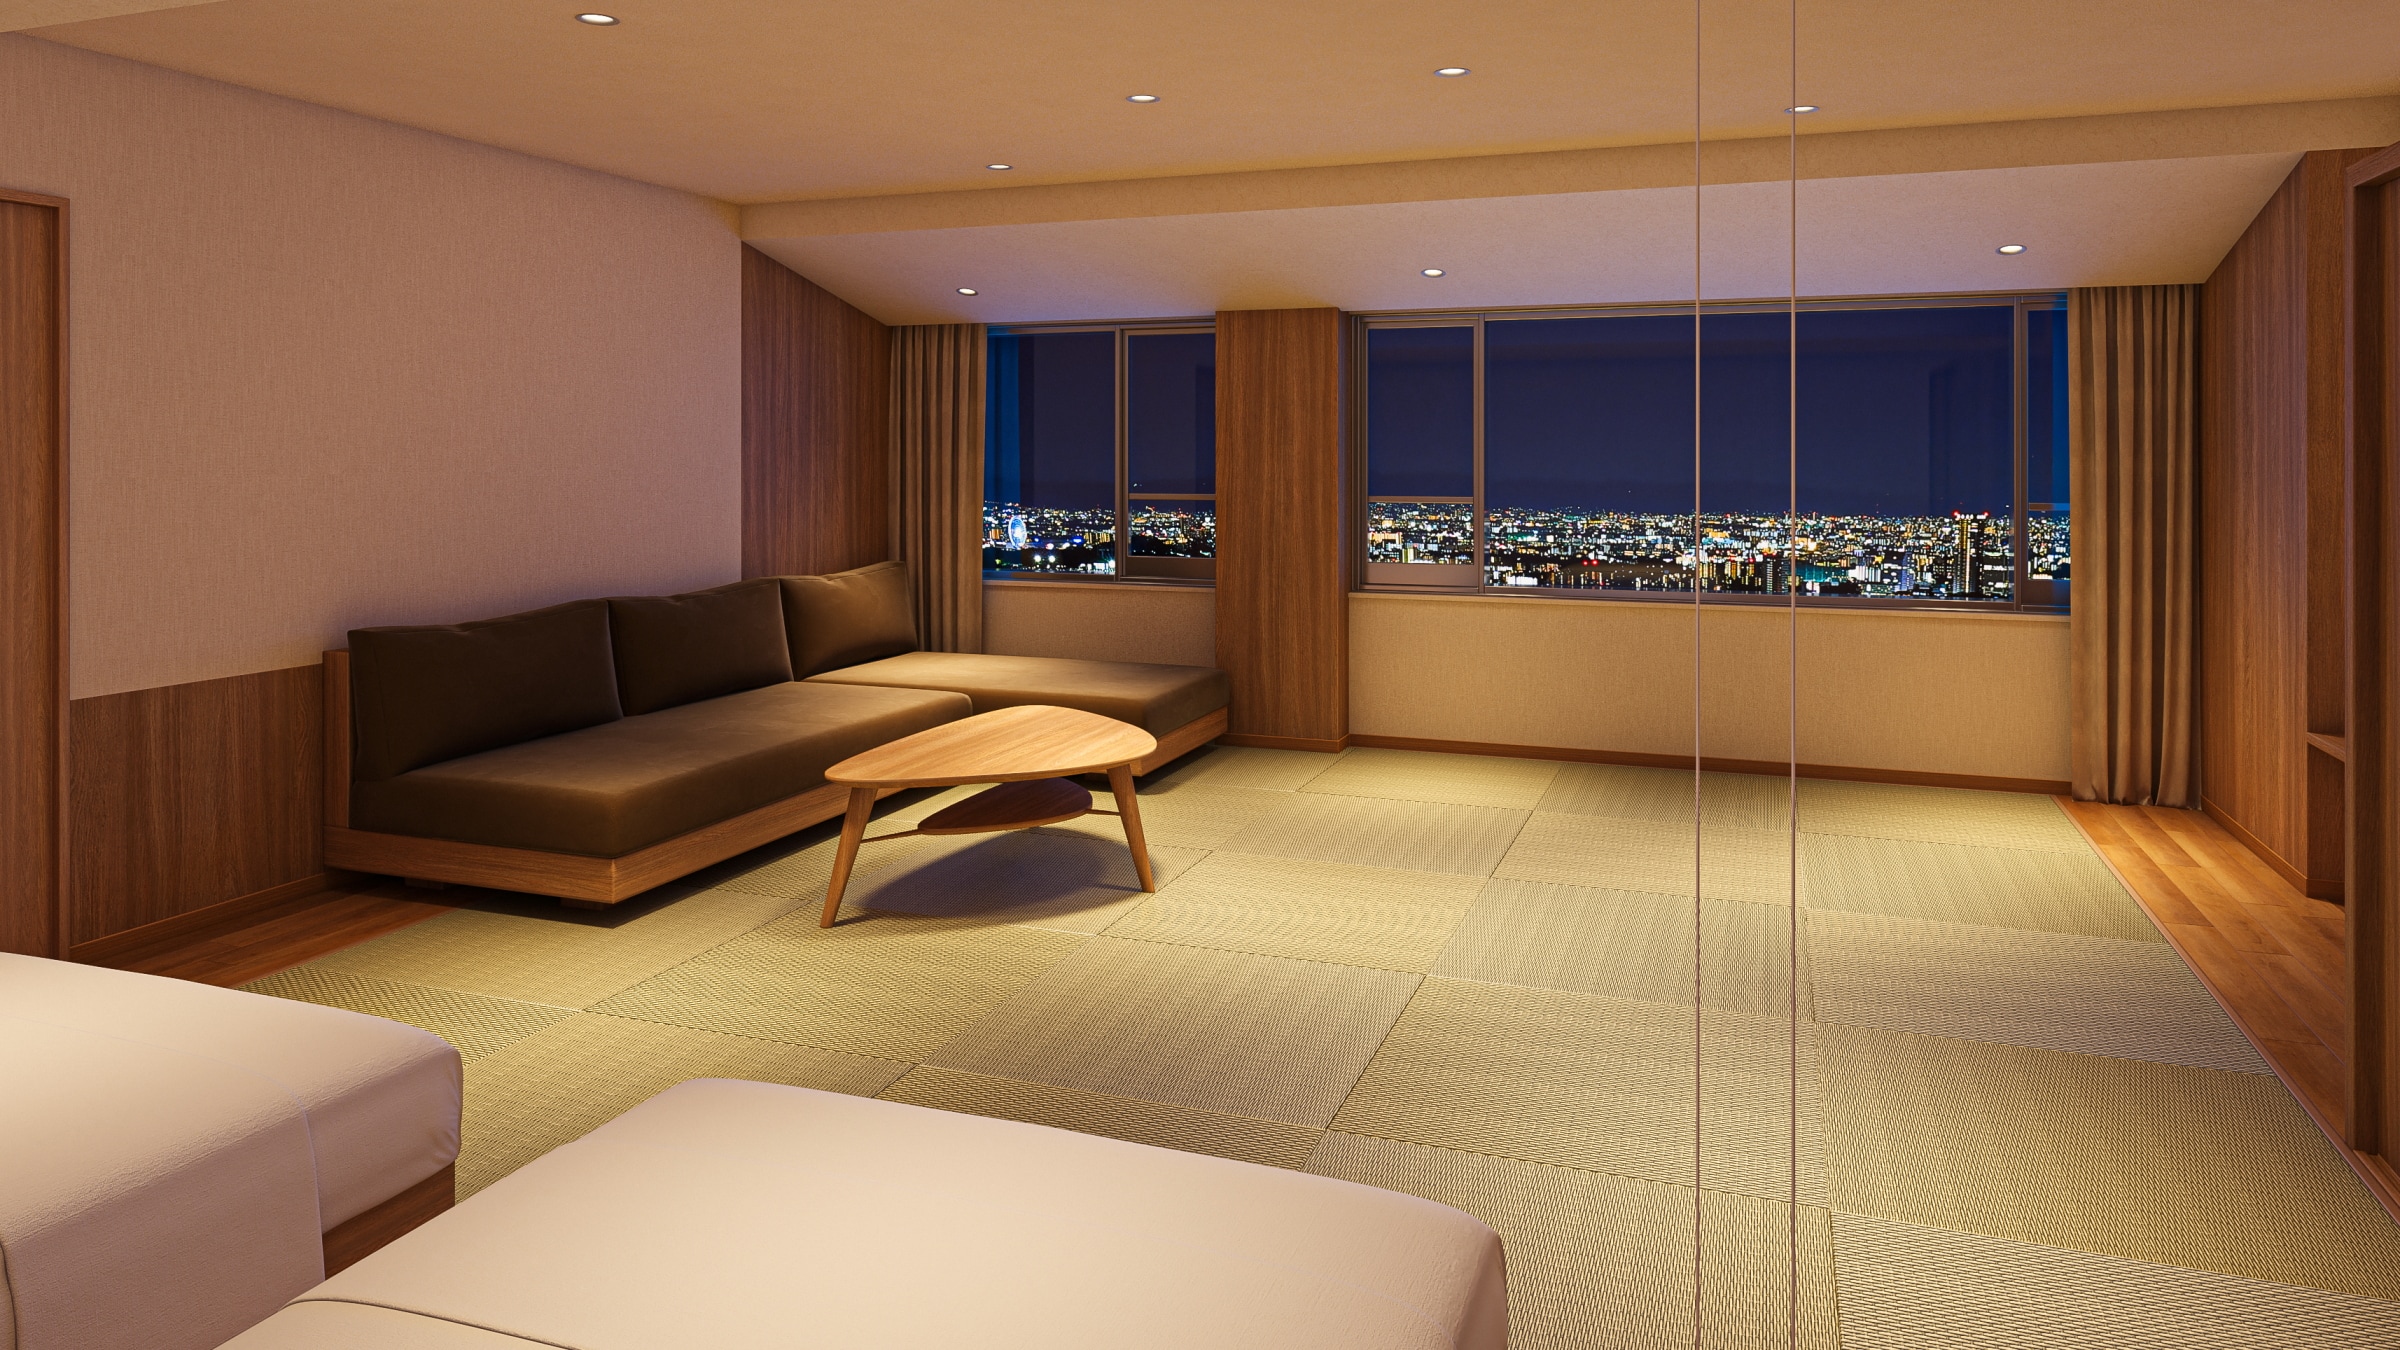 Japanese modern 12-tatami room with panoramic bath (completed image)